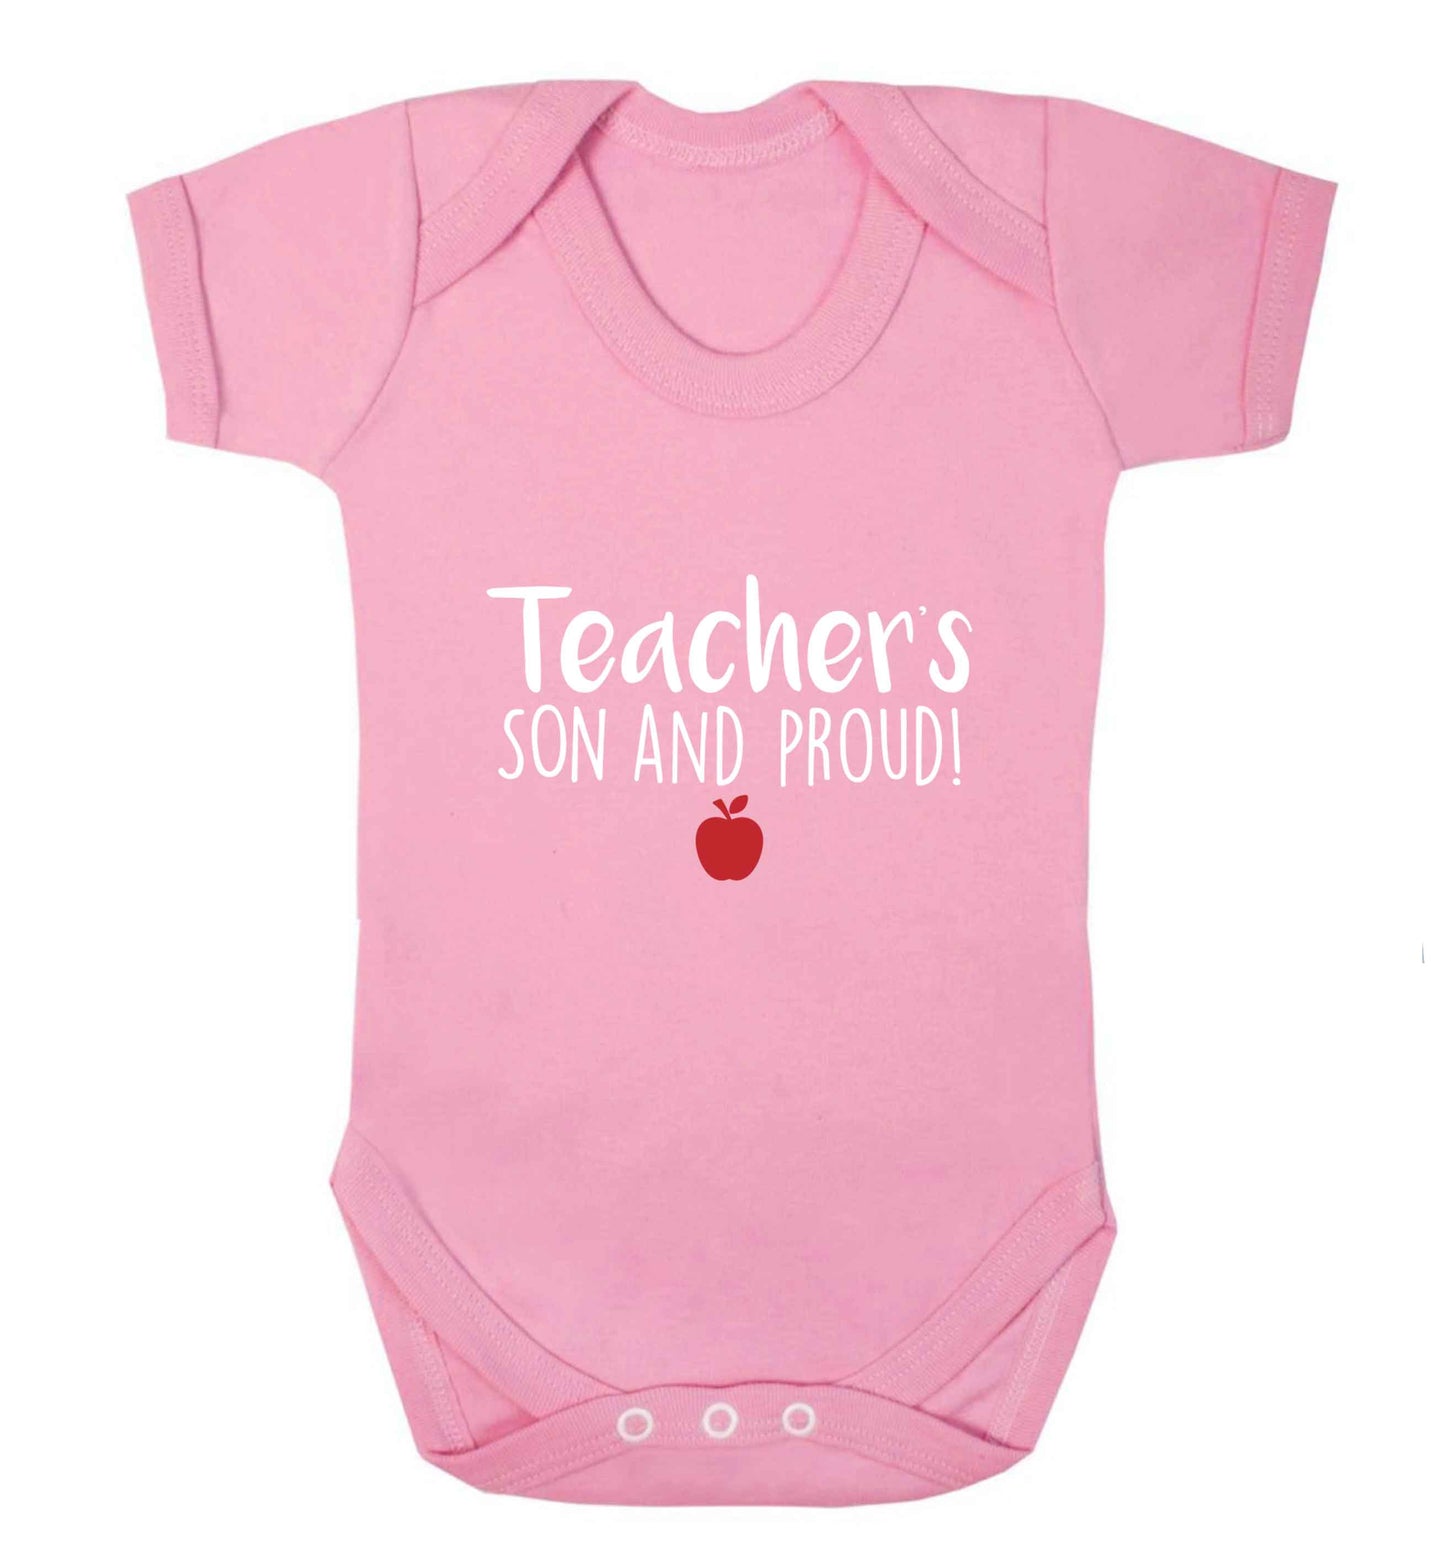 Teachers son and proud baby vest pale pink 18-24 months